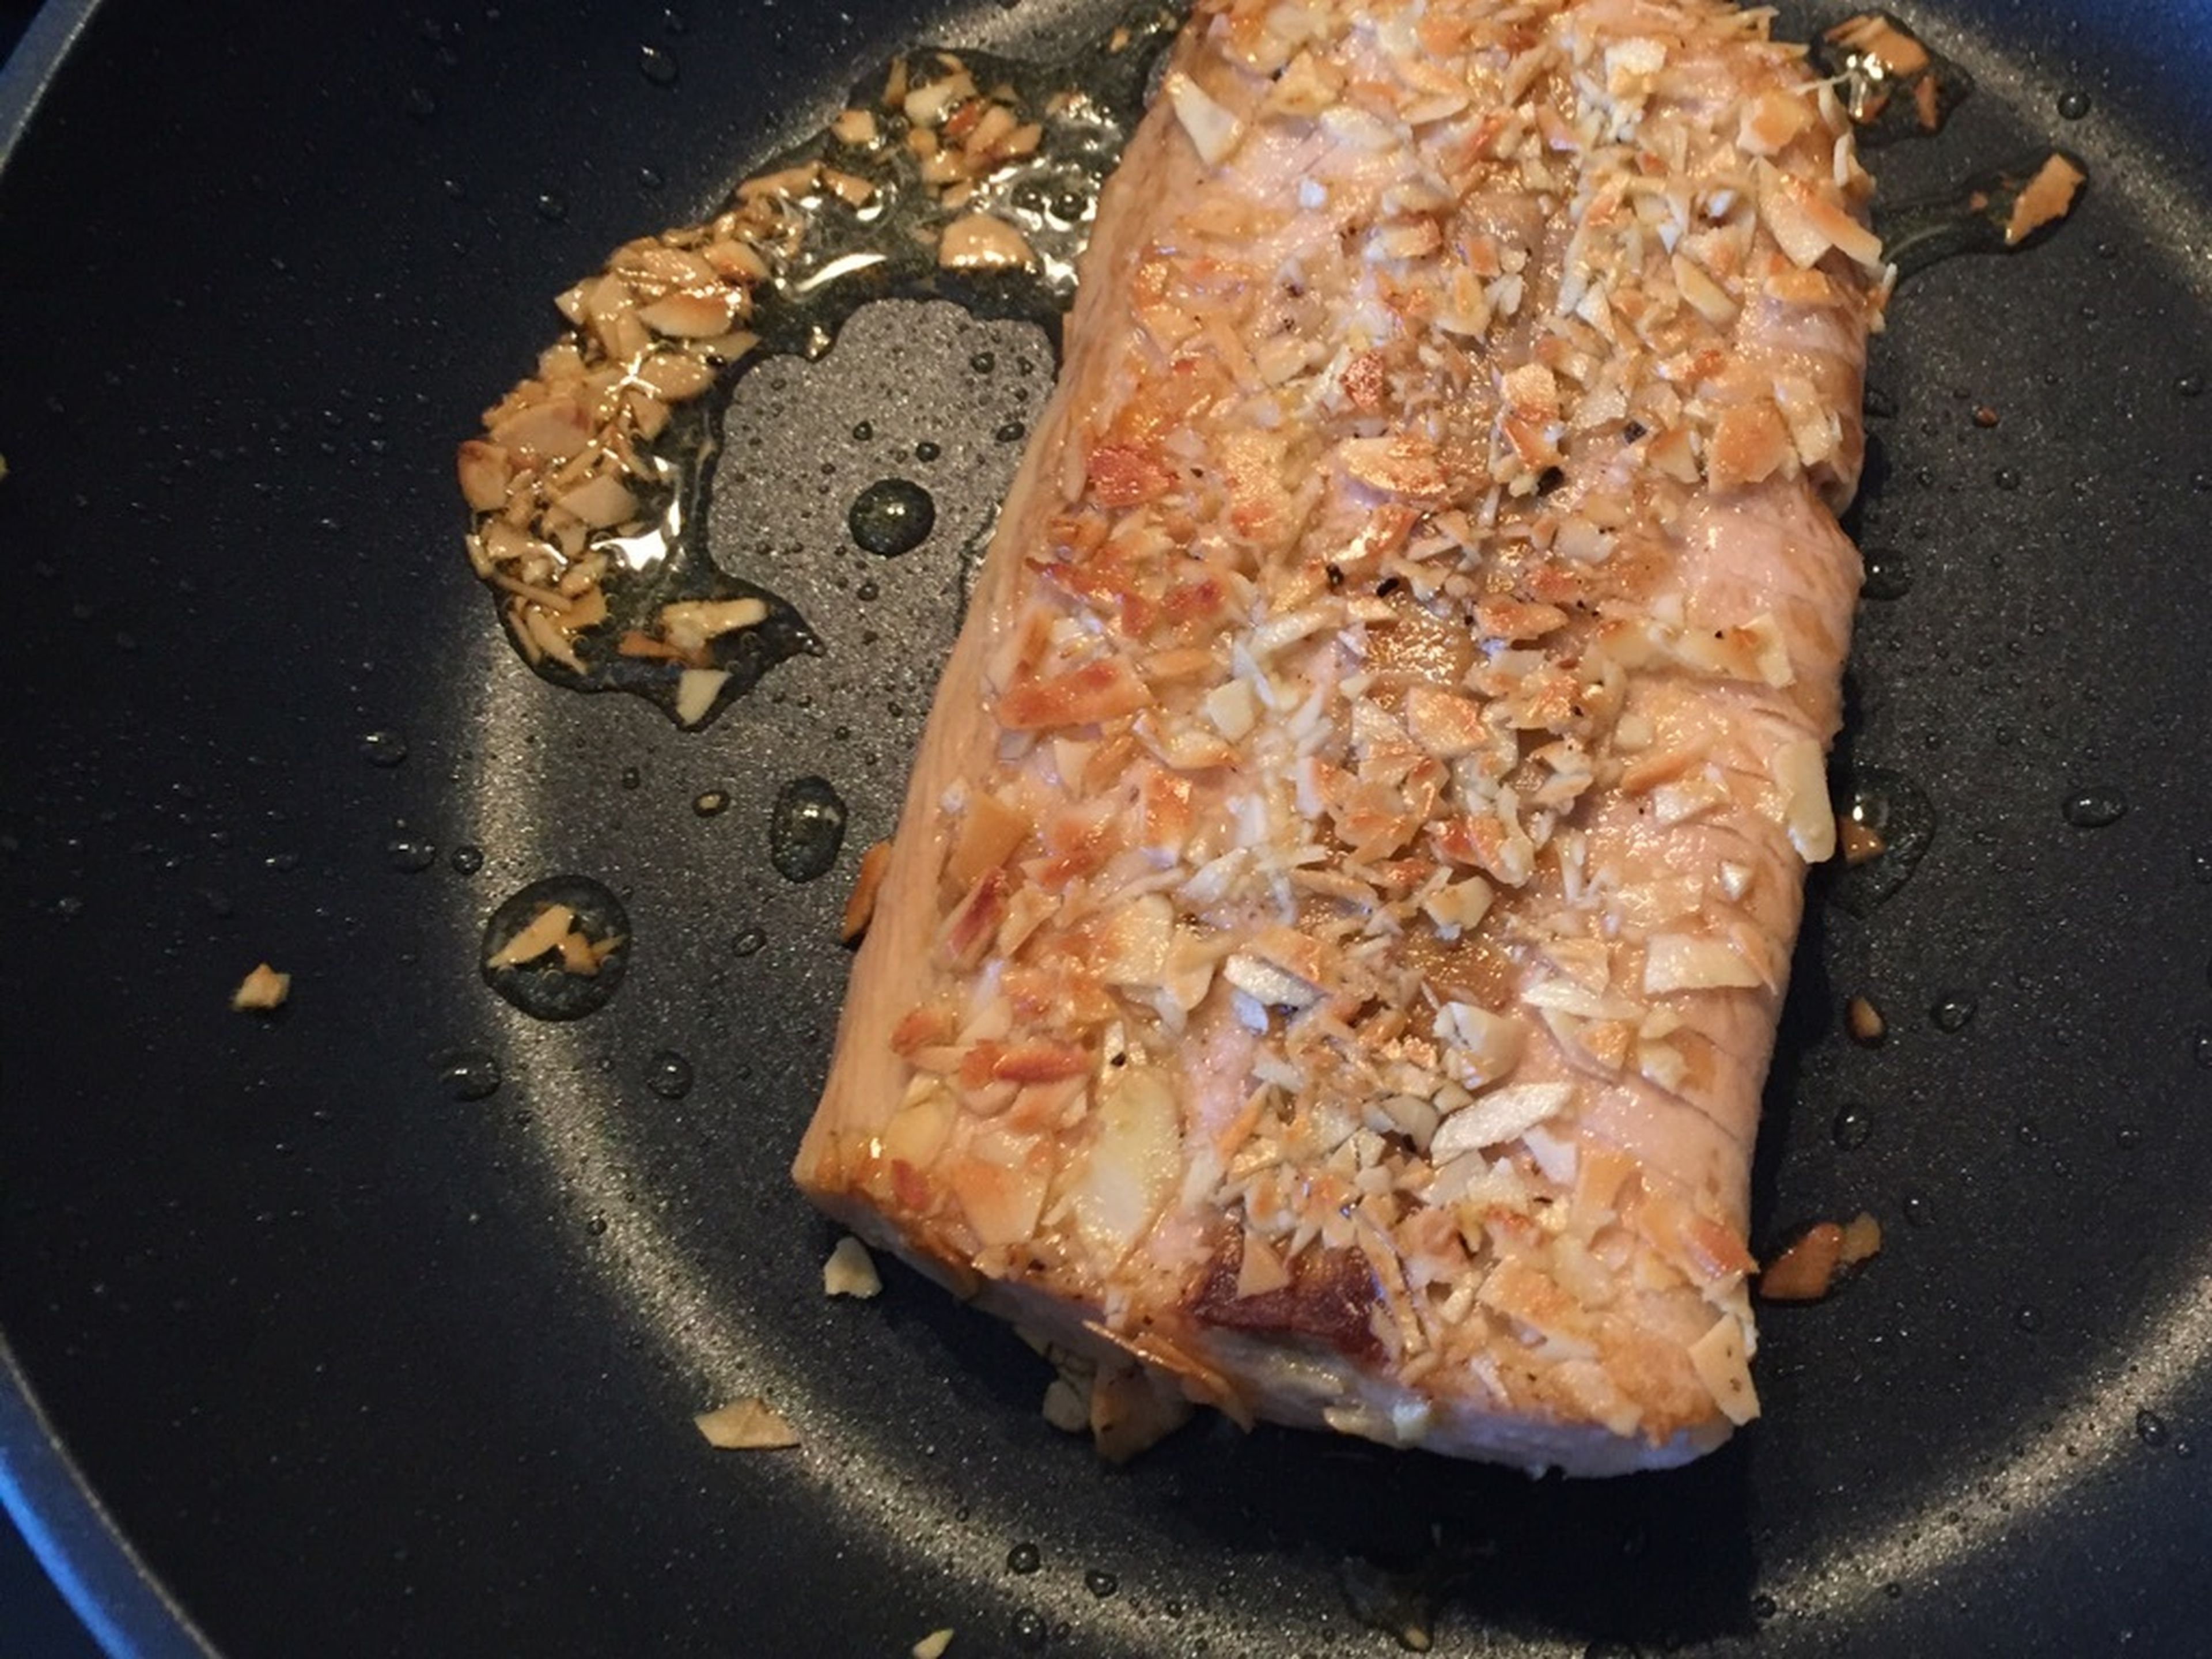 Fry the fish on each side for approx. 2 min. Turn carefully.